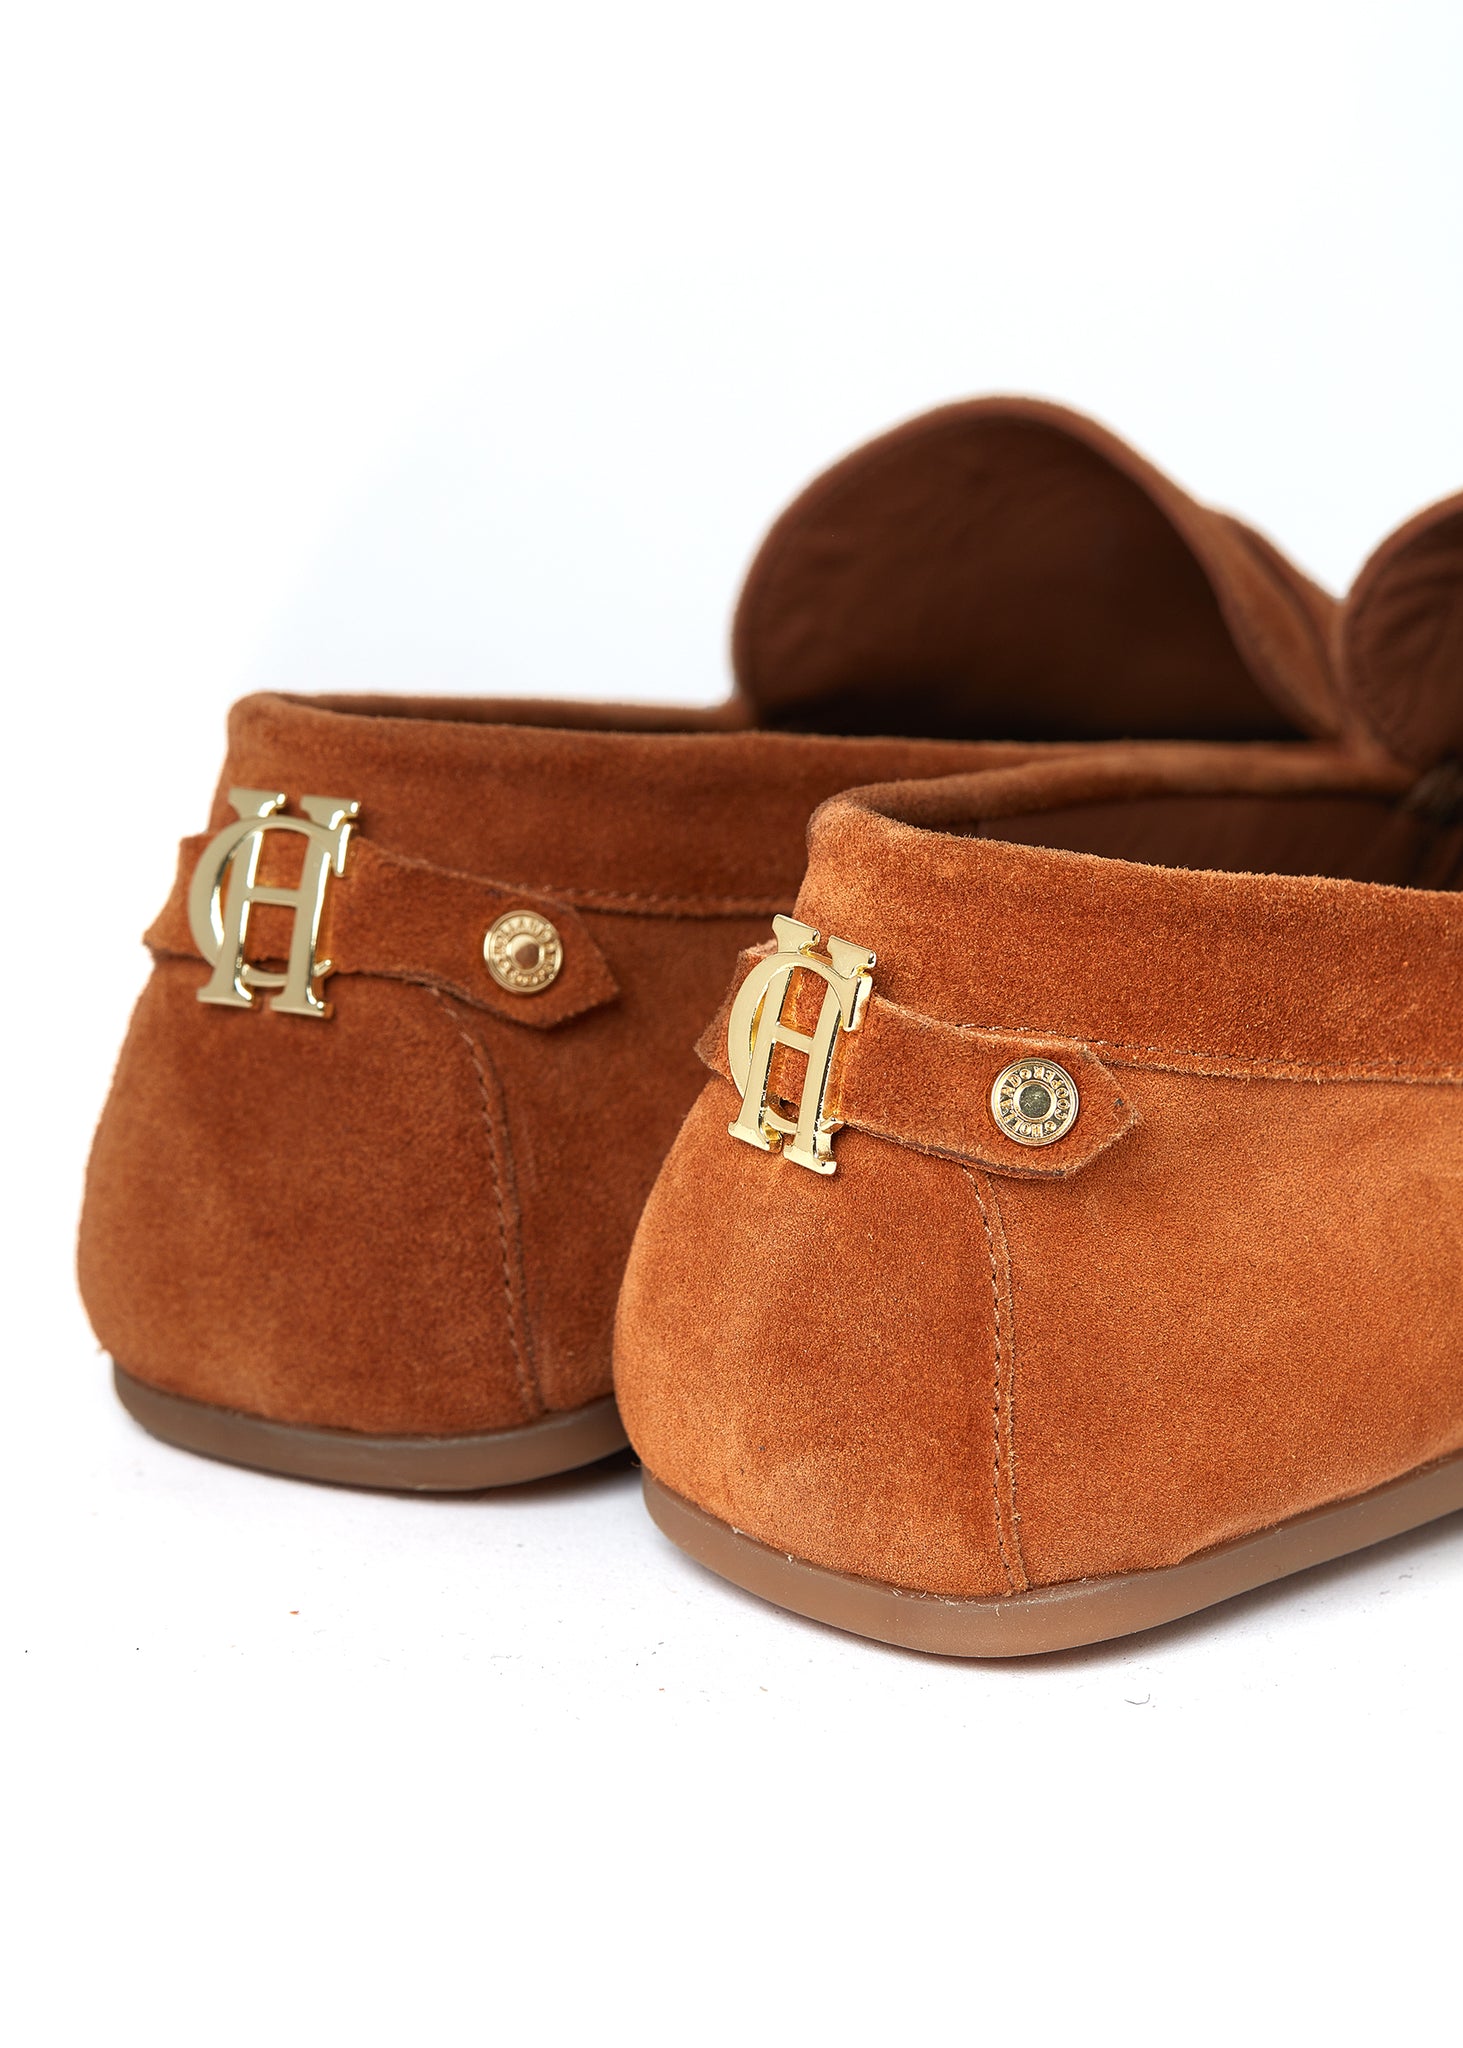 back of classic tan suede loafers with a leather sole and gold hardware